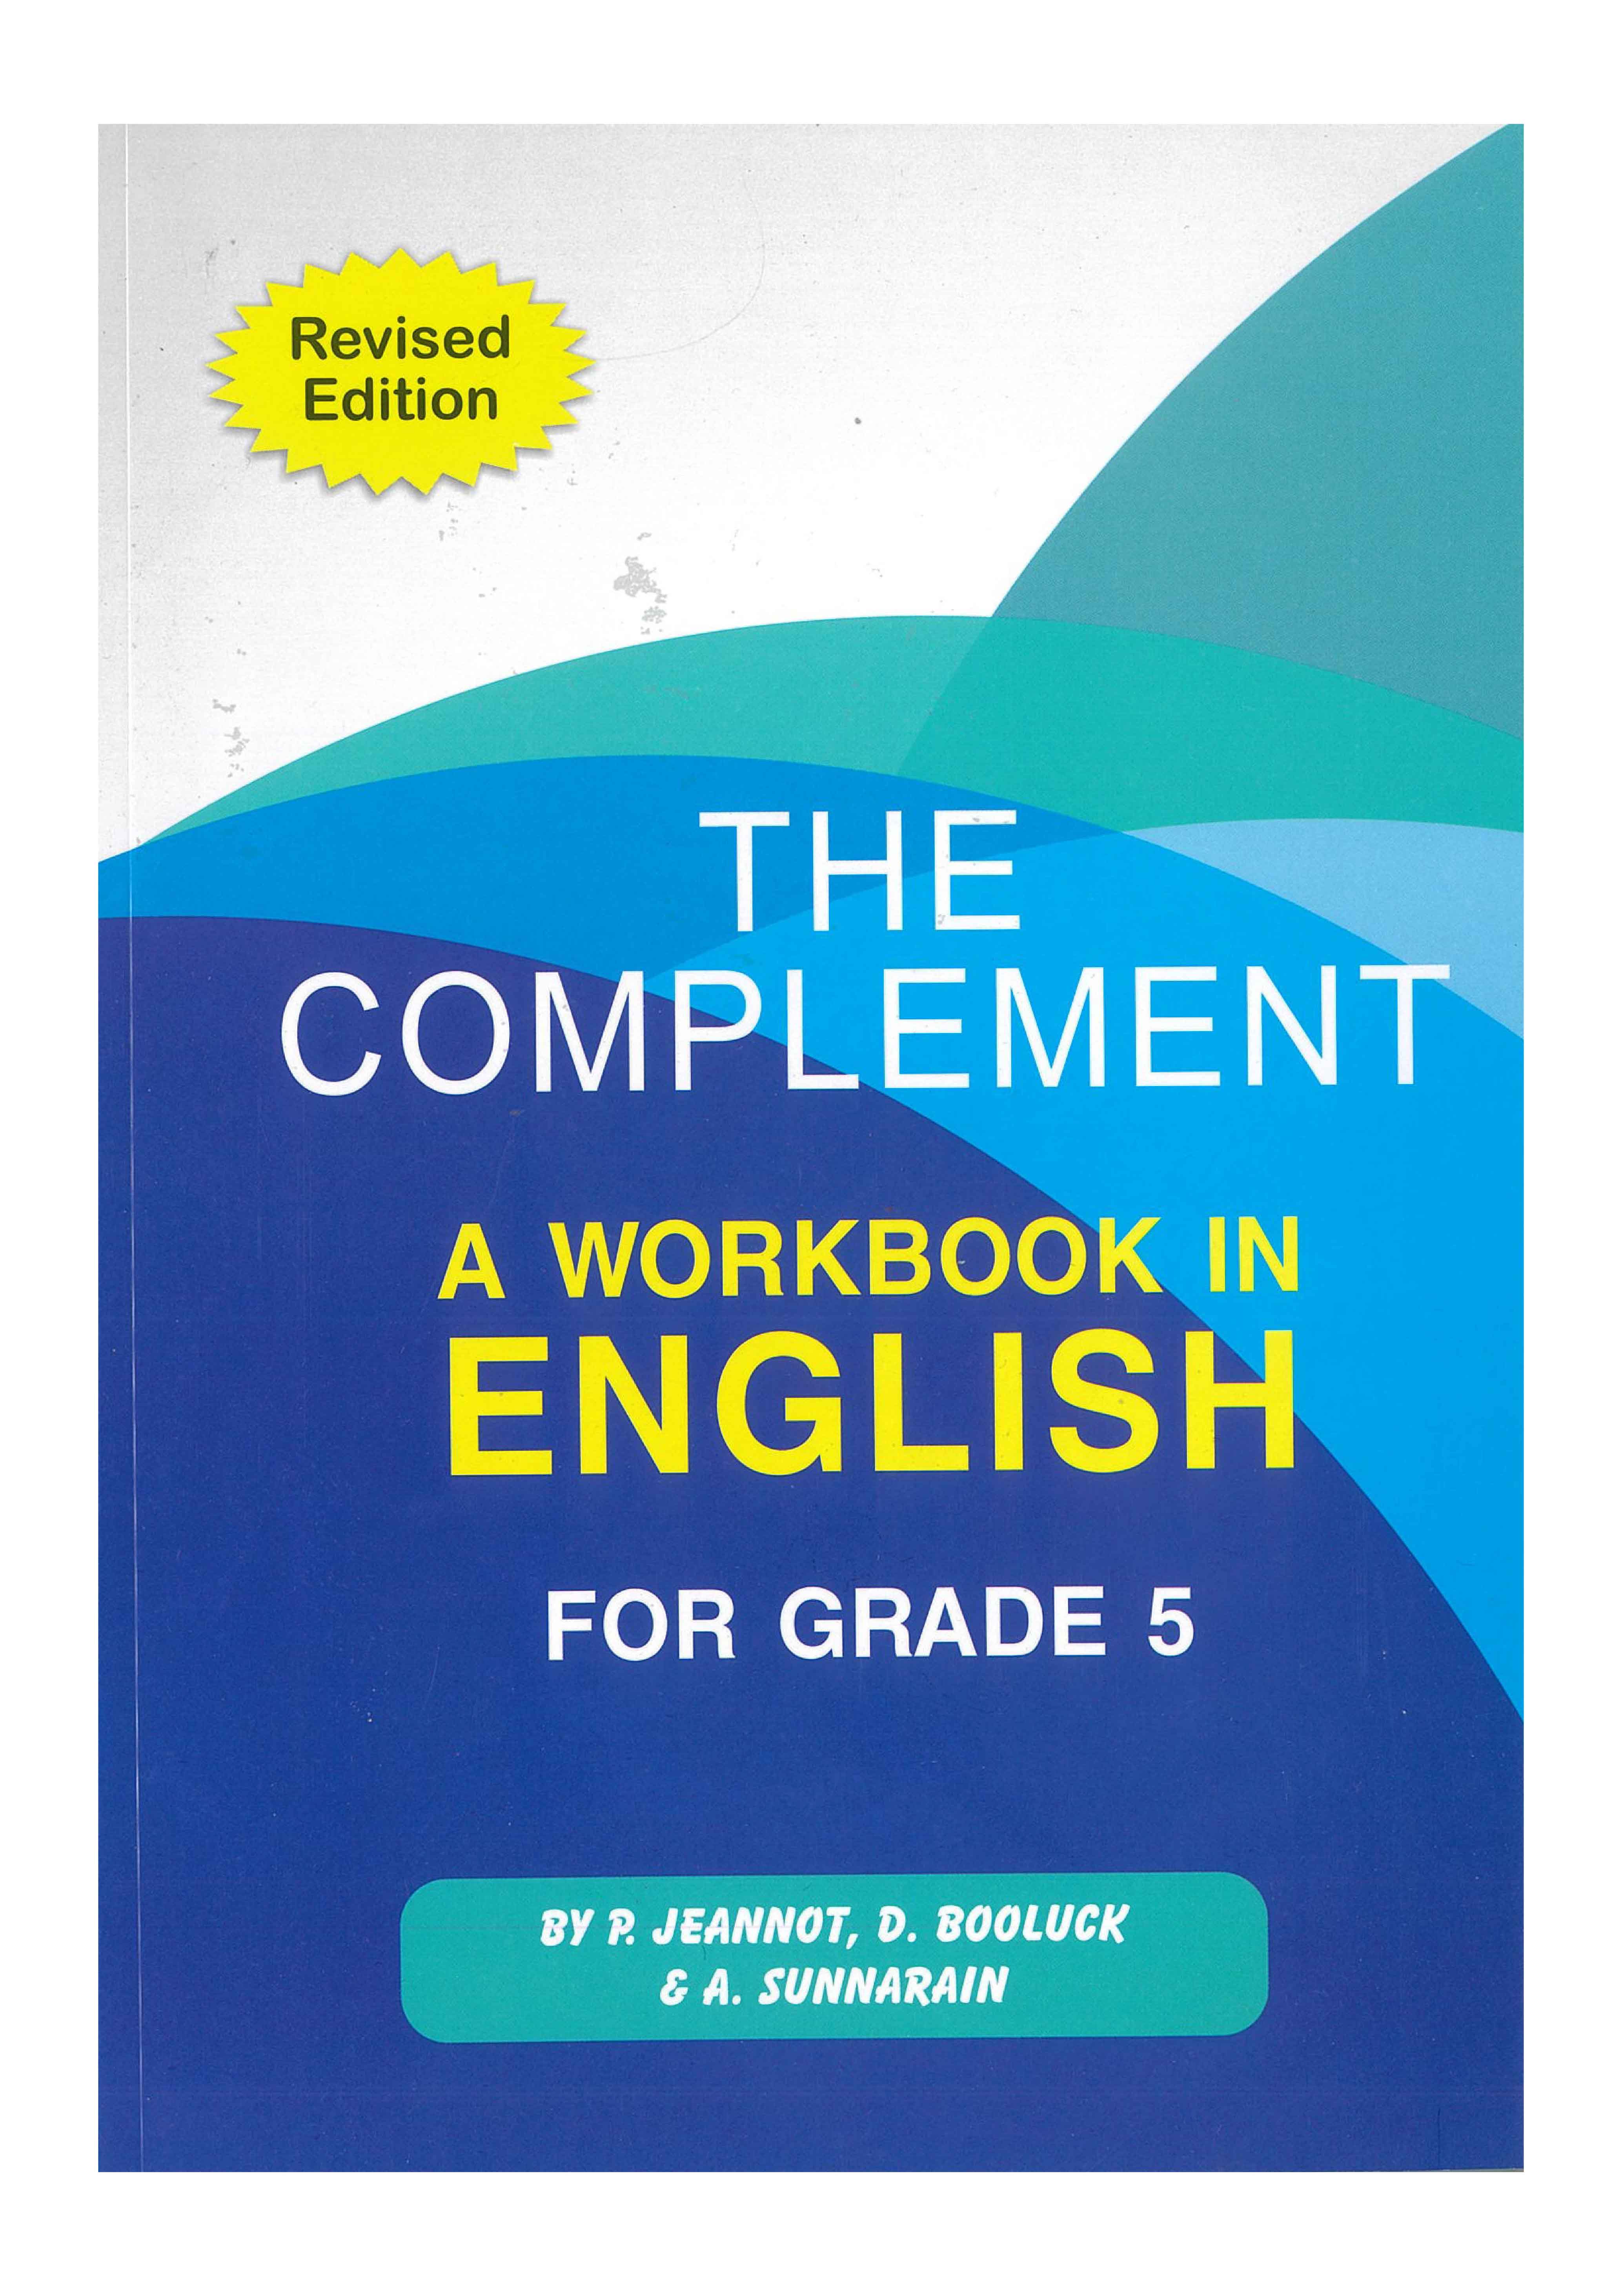 THE COMPLEMENT ENGLISH WORKBOOK GRADE 5